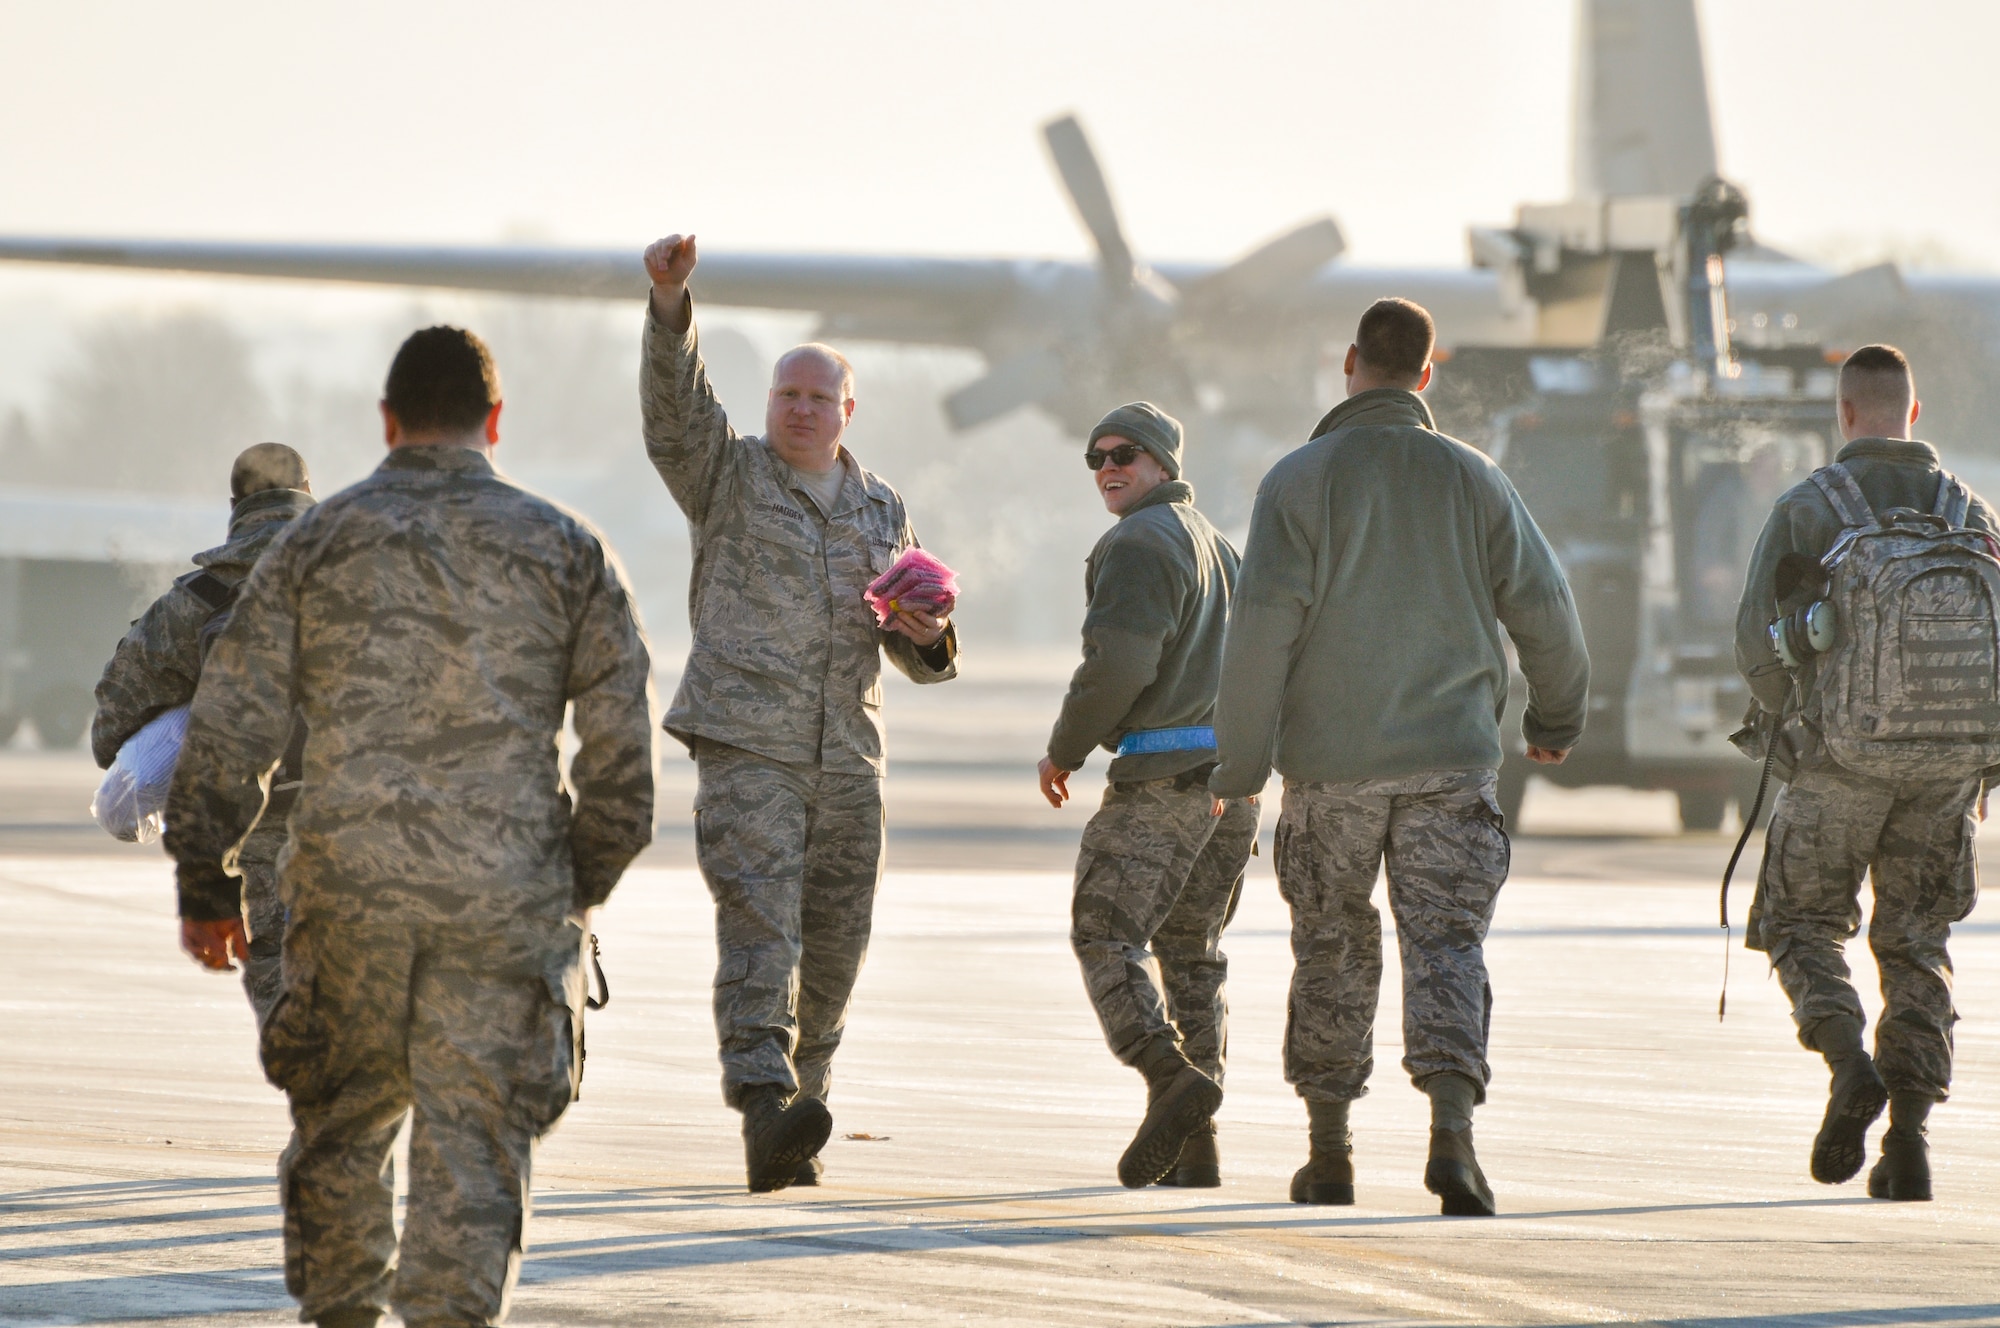 Master Sgt. Jeremy Hadden, 934th Maintenance Group crew chief, gives a final wave to his family before deploying to Southwest Asia. (Air Force Photo/Tech Sgt. Bob Sommer)